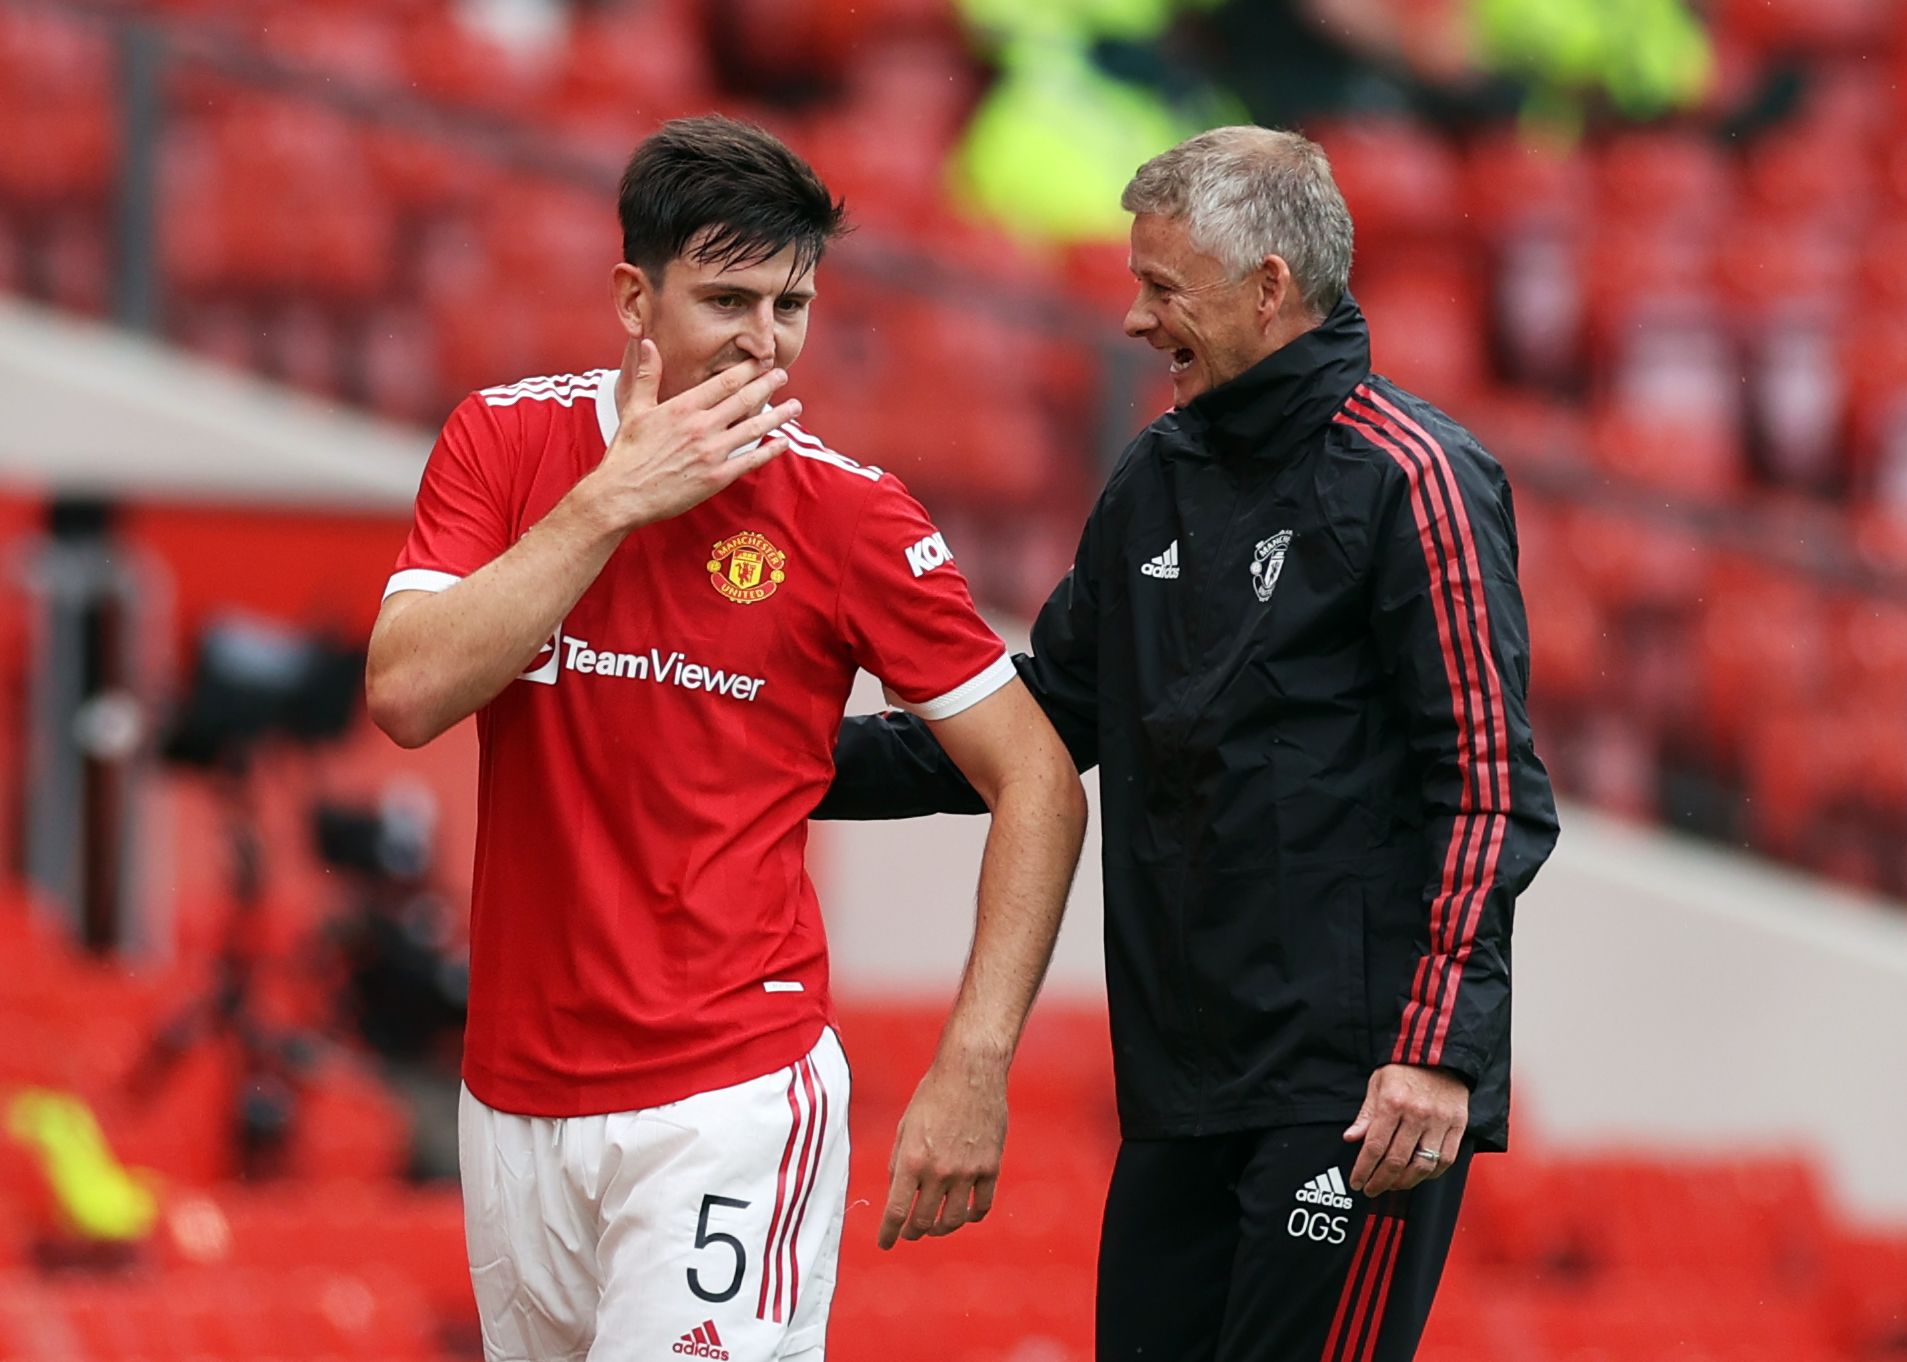 Soccer Football - Pre Season Friendly - Manchester United v Everton - Old Trafford, Manchester, Britain - August 7, 2021 Manchester United's Harry Maguire speaks with manager Ole Gunnar Solskjaer as he walks off to be substituted Action Images via Reuters/Lee Smith